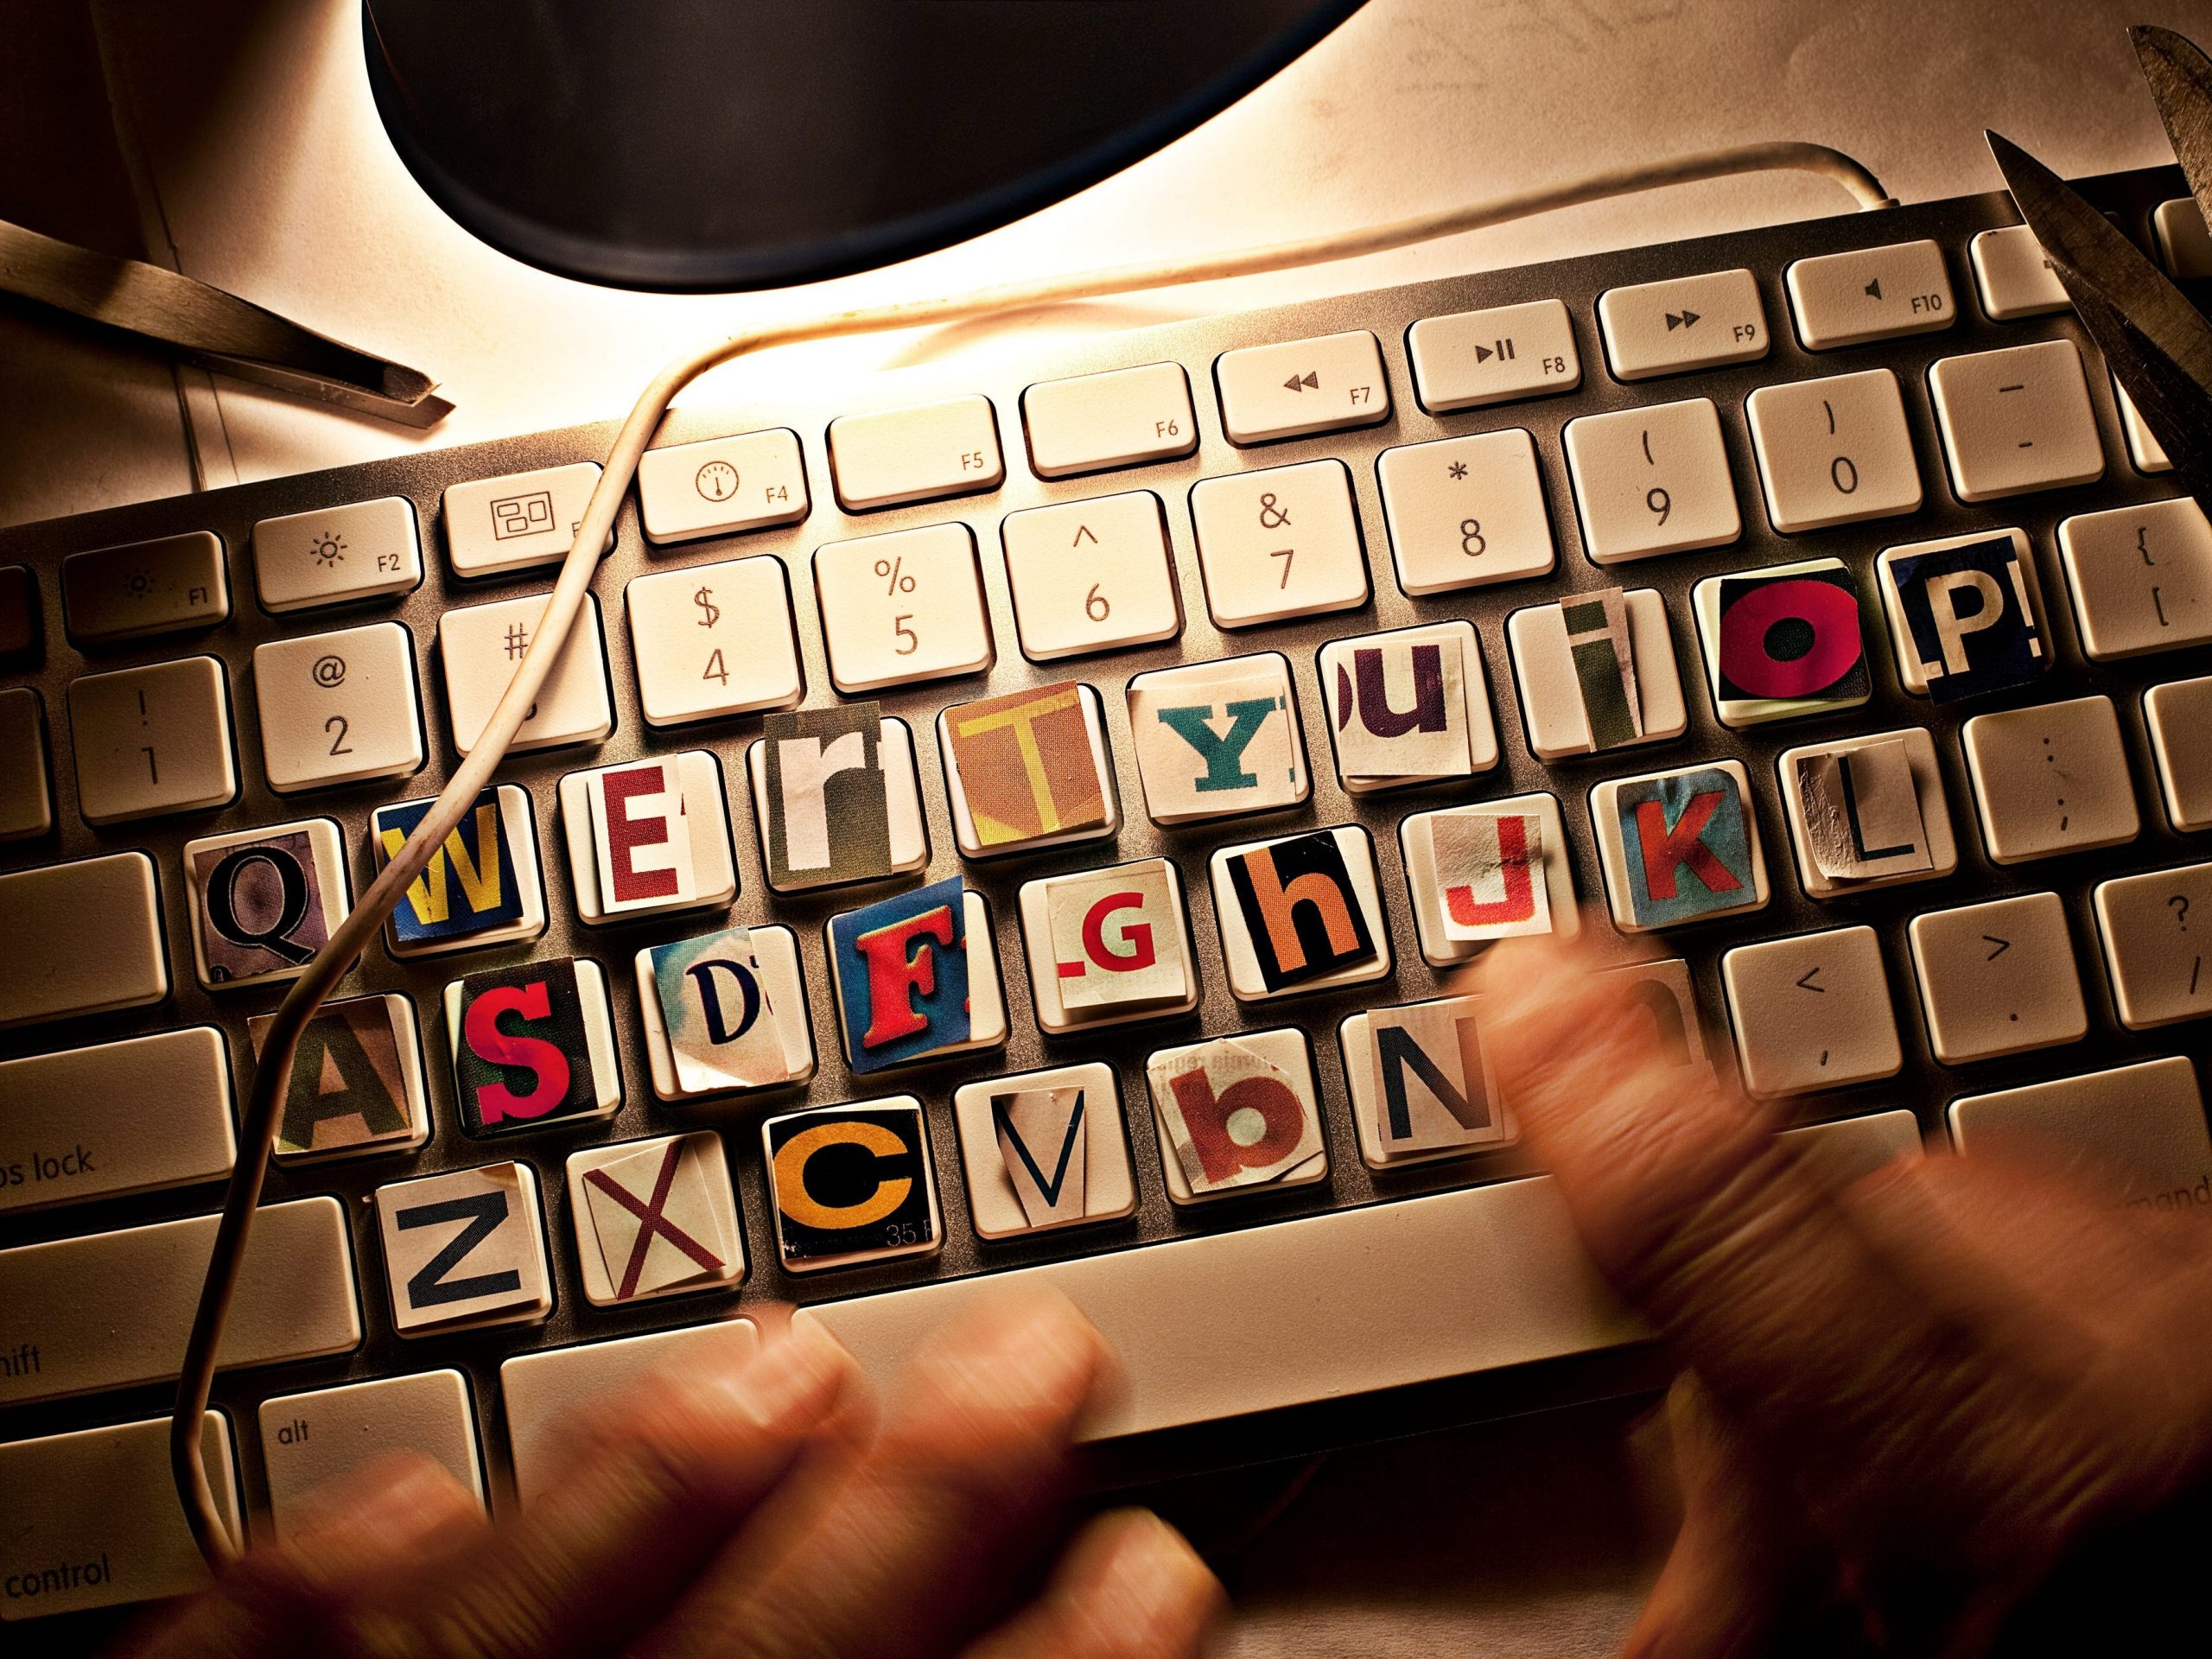 Keyboard replaced with ransom-style letters.